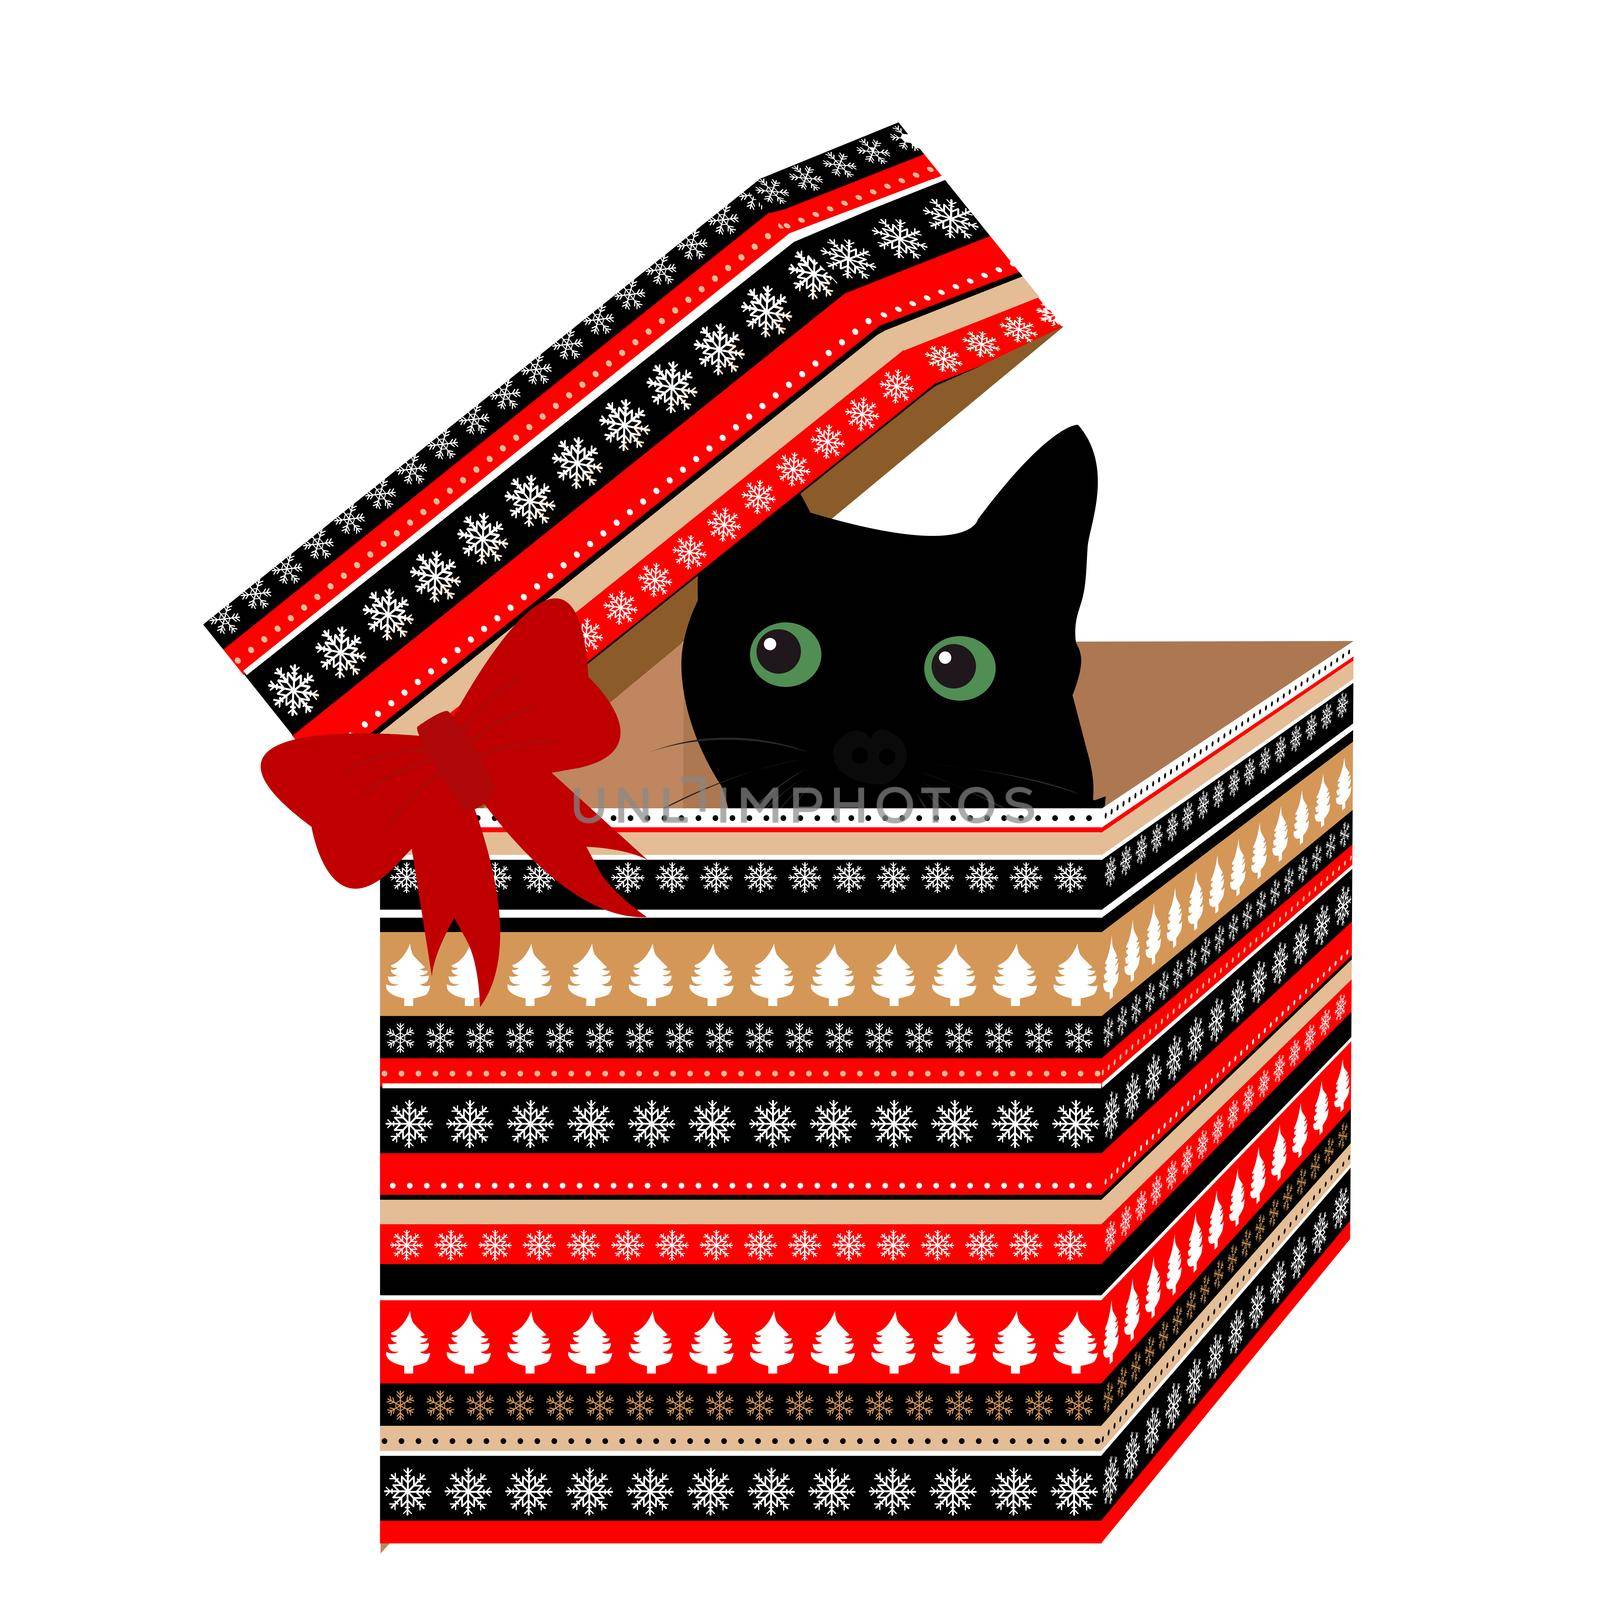 Gift box for Christmas with black cat in it